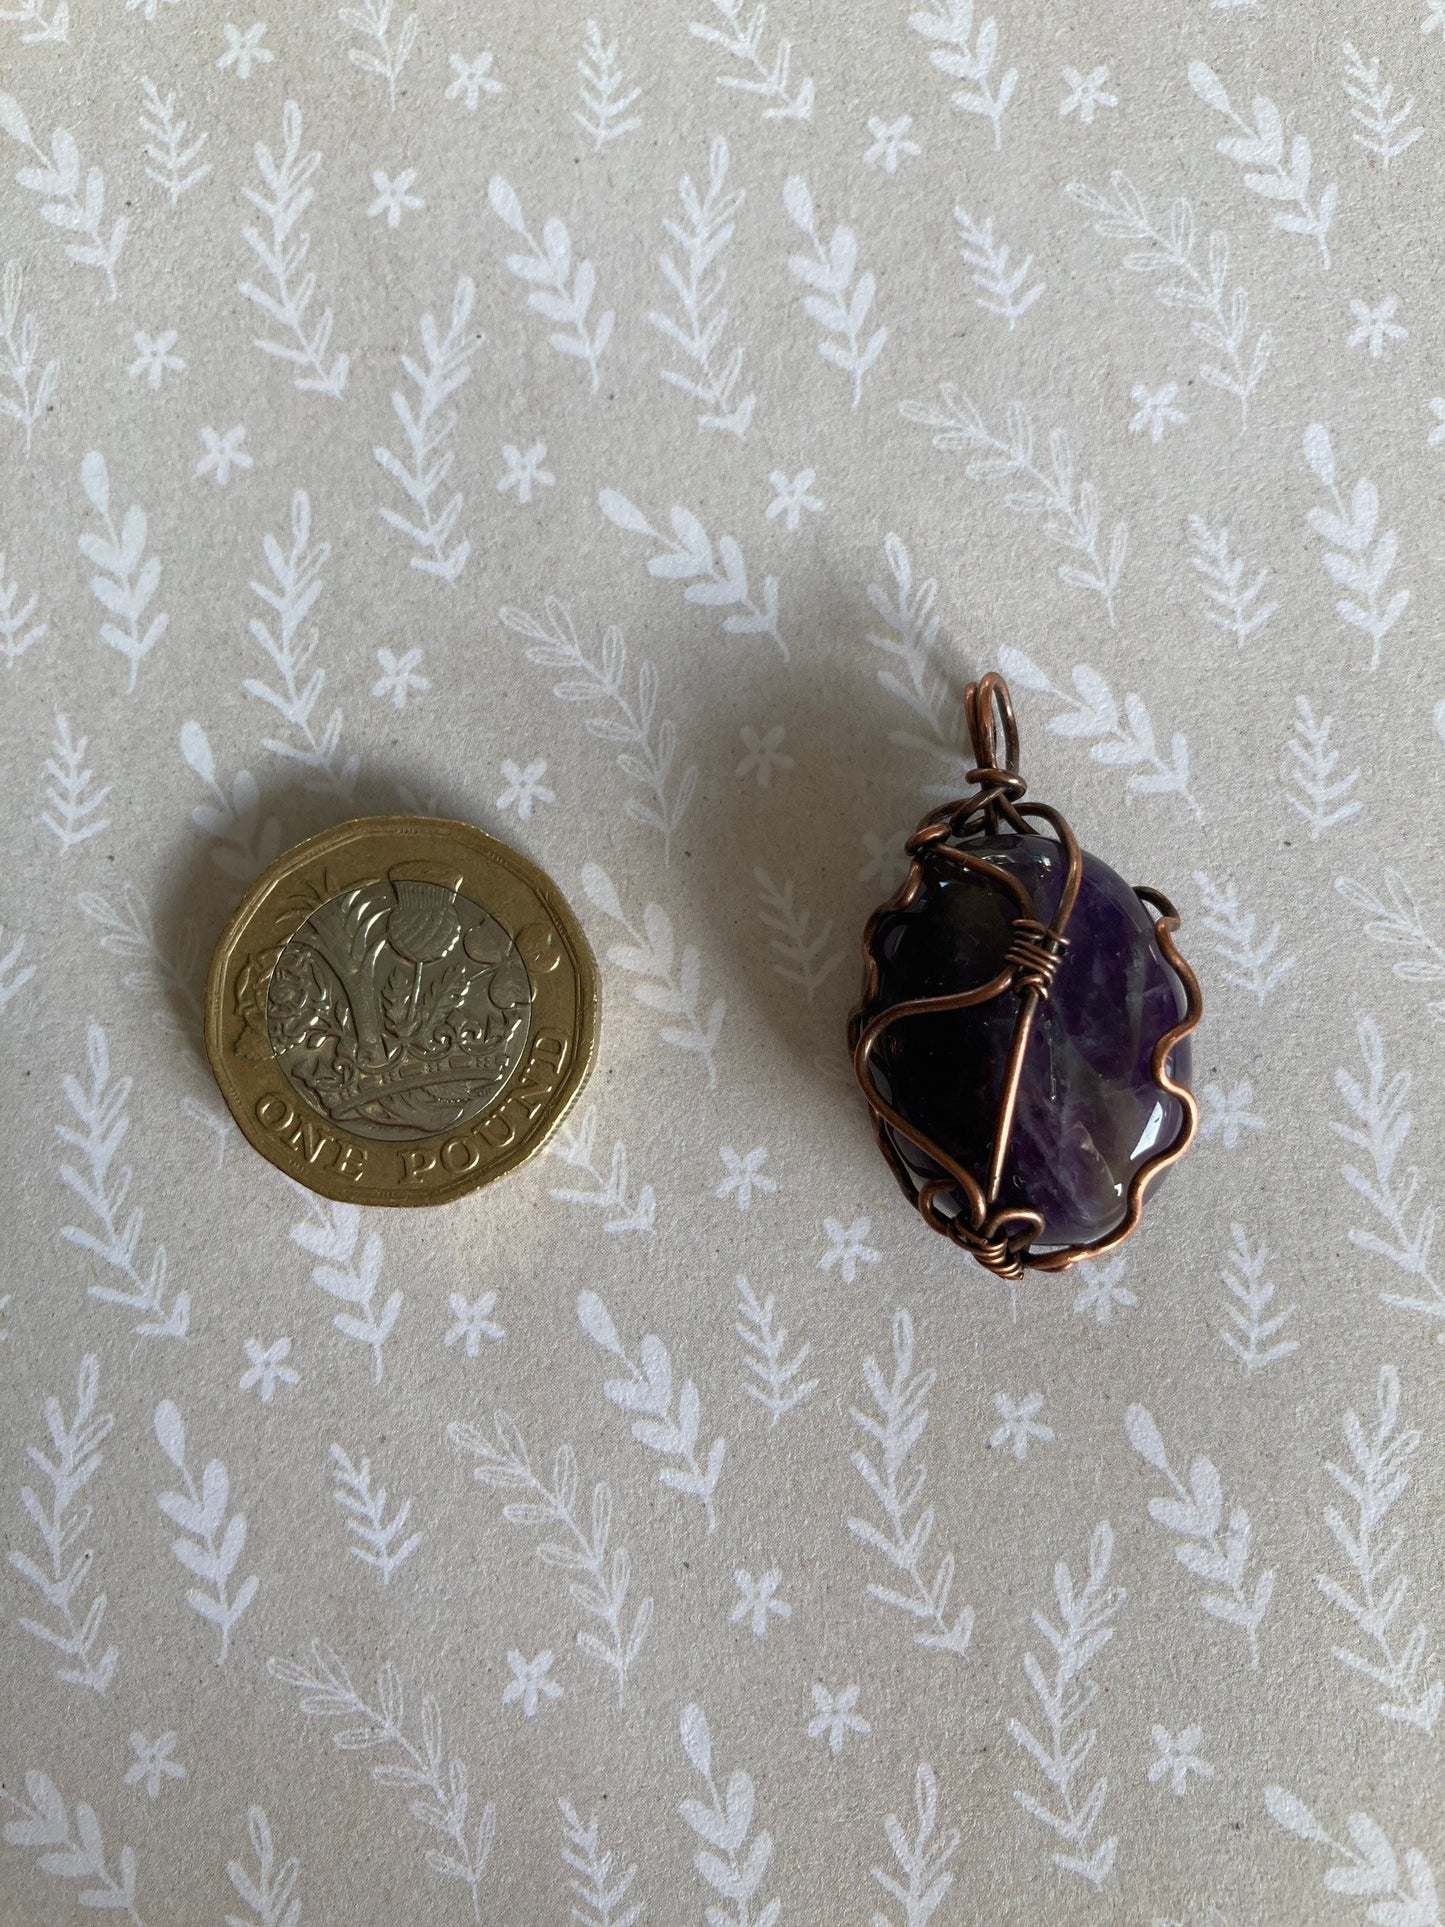 Amethyst pendant handmade necklace wire wrapped natural stone with 18 inch length chain